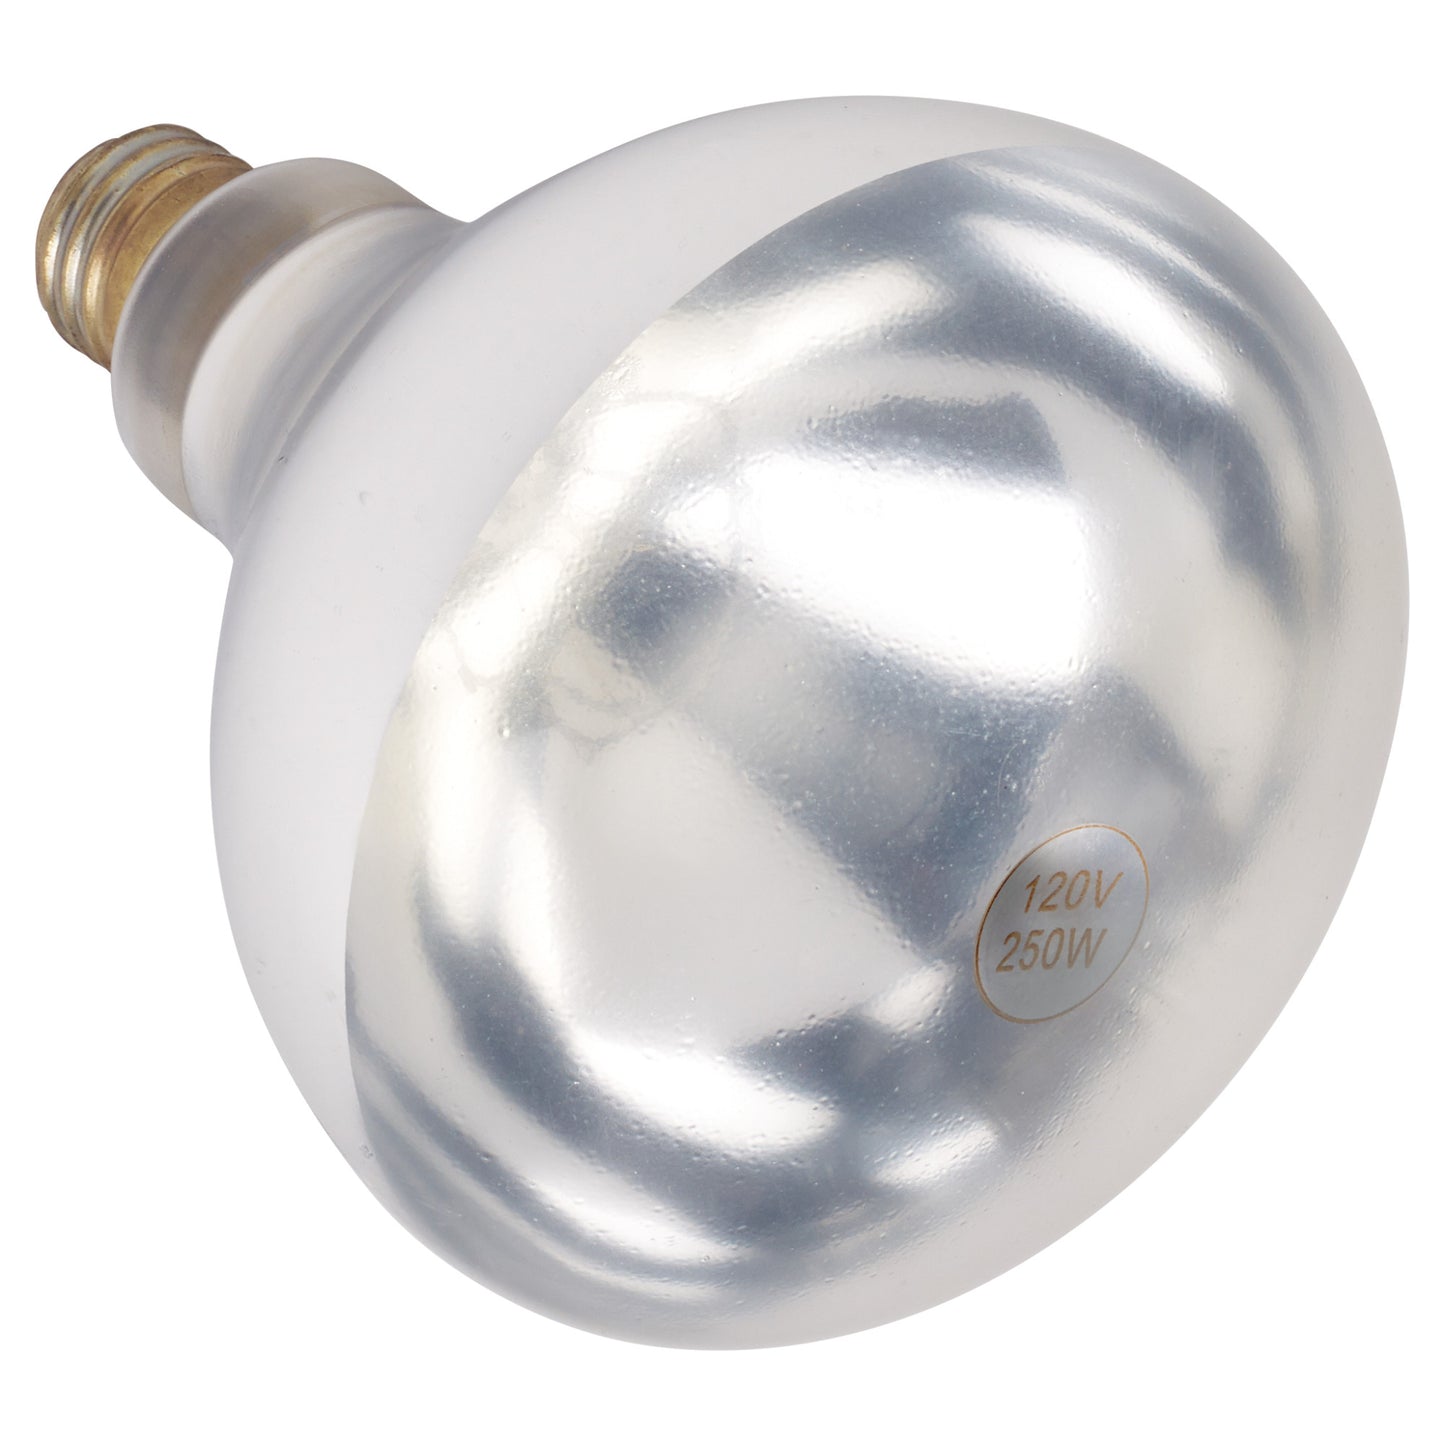 EHL-BW - Shatter-Resistant Bulb, 250W, Clear